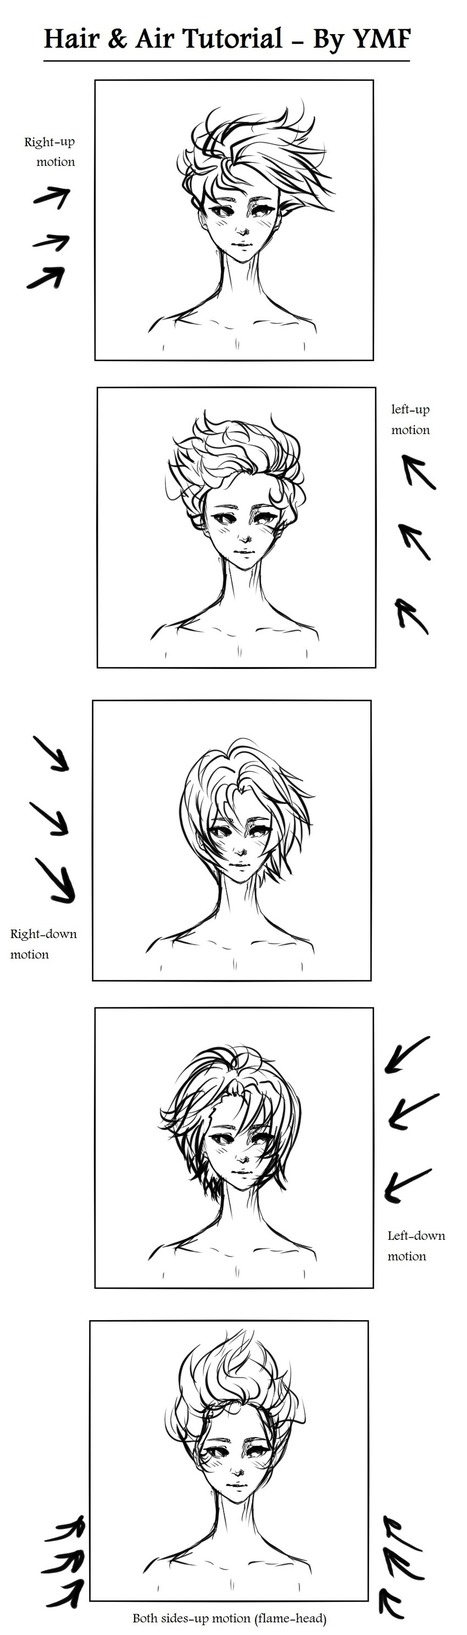 How Hair Moves with Air -Tutorial | Drawing and Painting Tutorials | Scoop.it